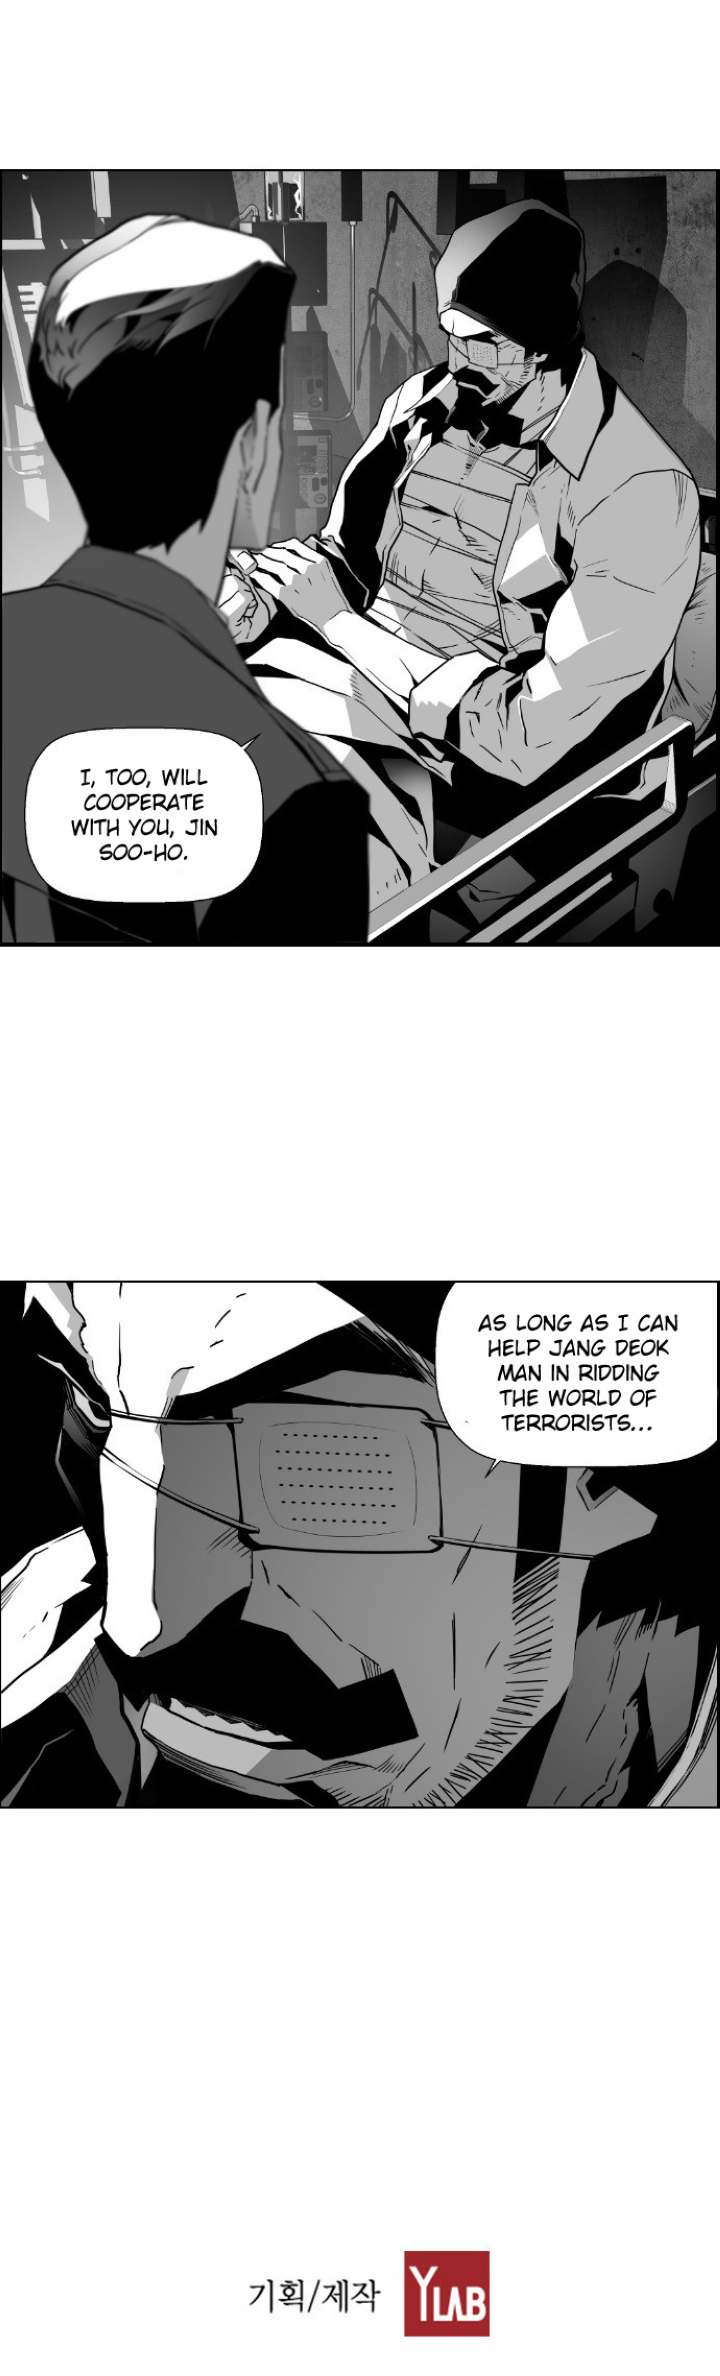 Terror Man - Chapter 39 Page 34